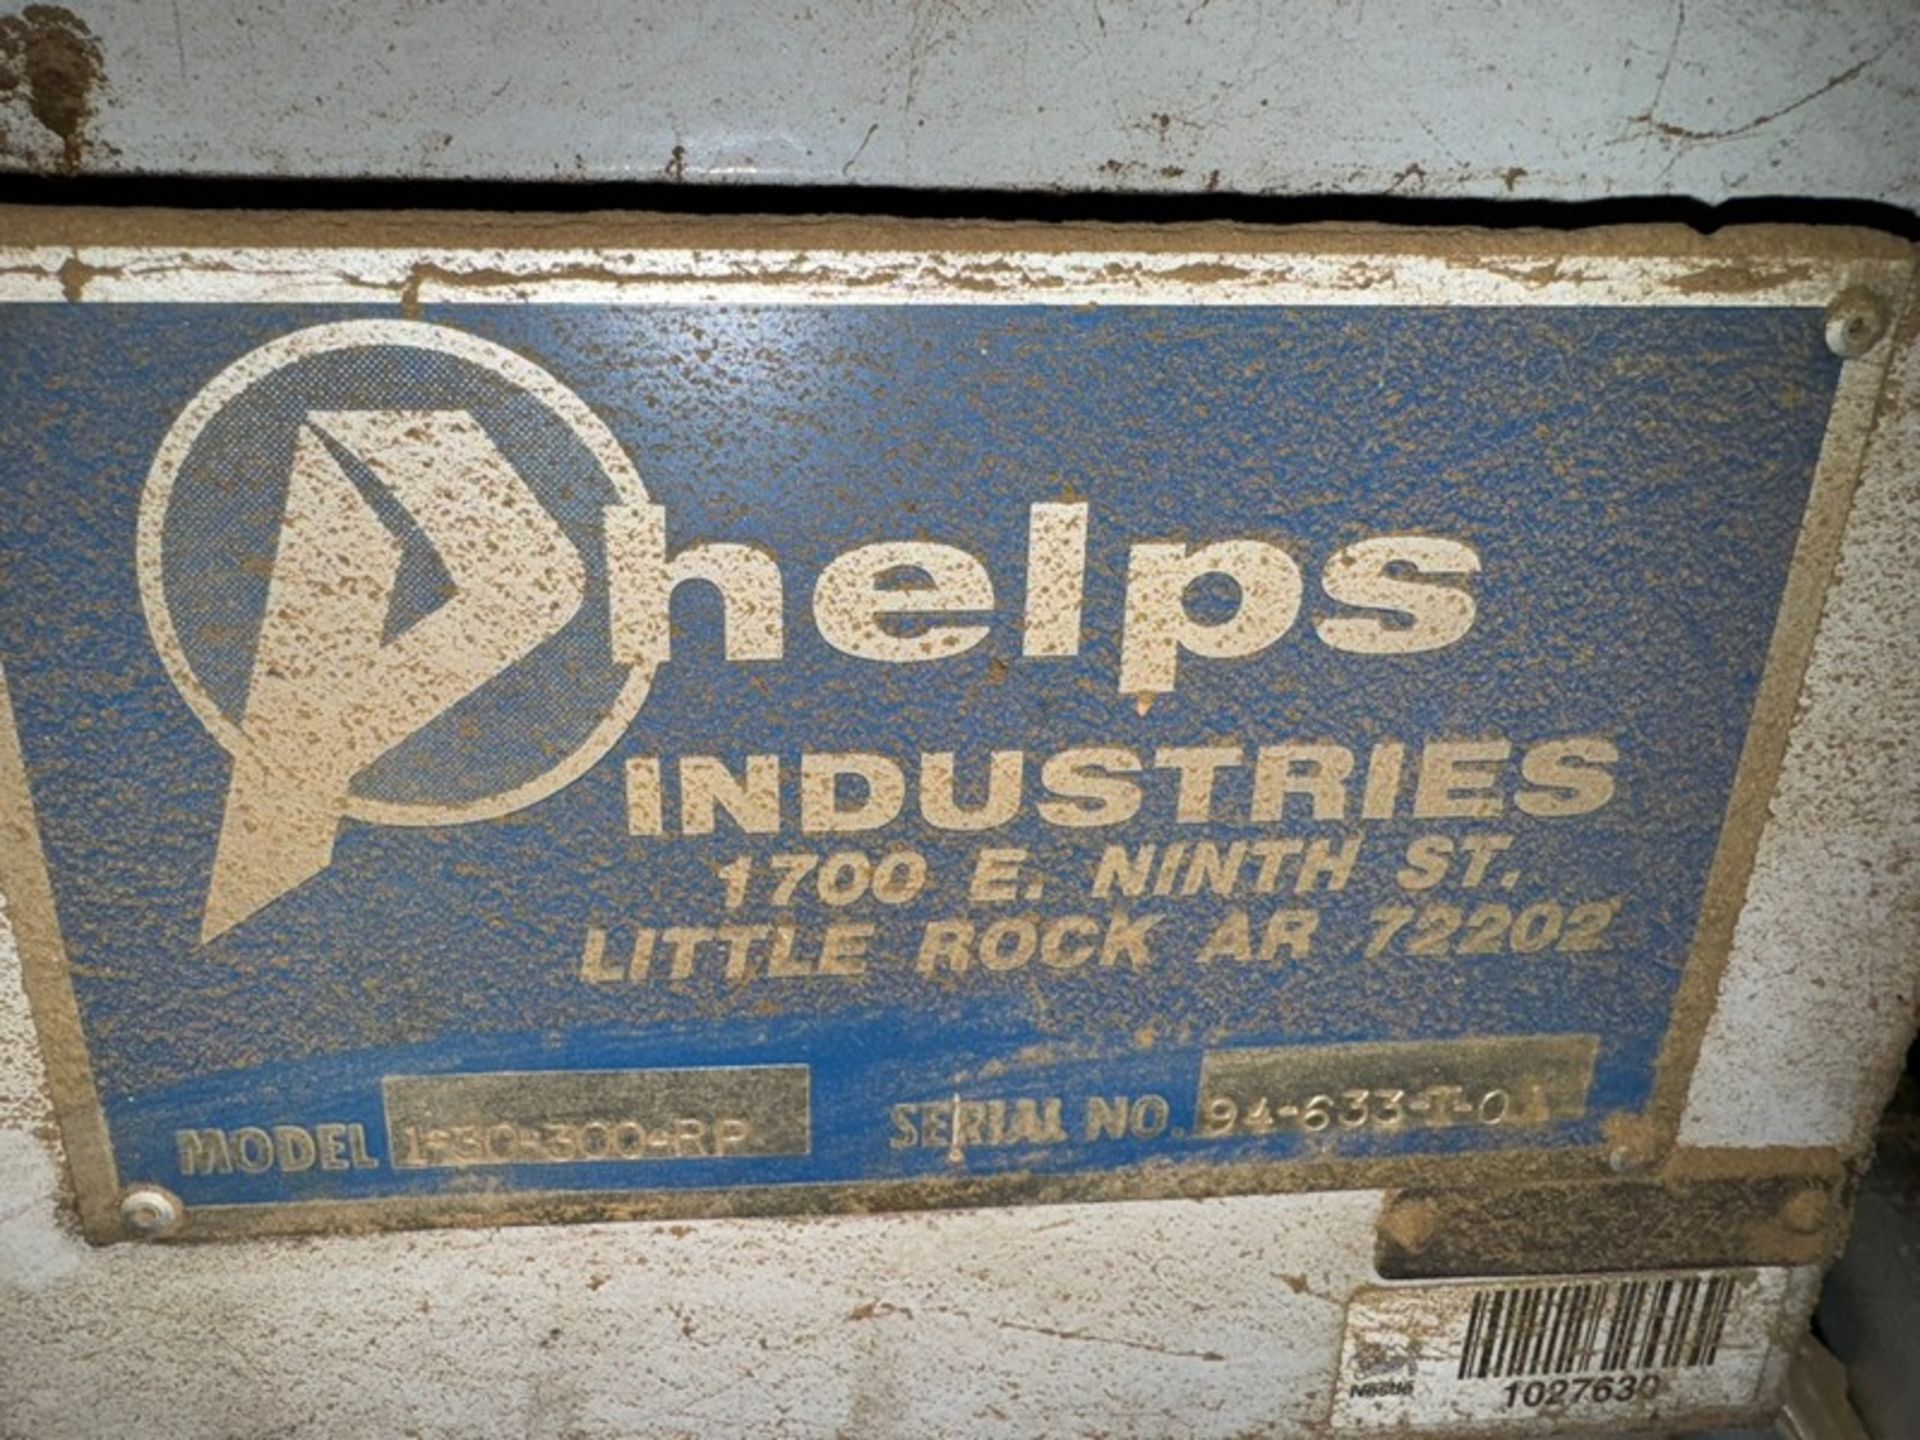 Phelps 30 hp Hydraulic Unit, M/N 1-30-300-RP, S/N 94-633-T-0 (Located Freehold, NJ) (Simple Loading - Image 4 of 4